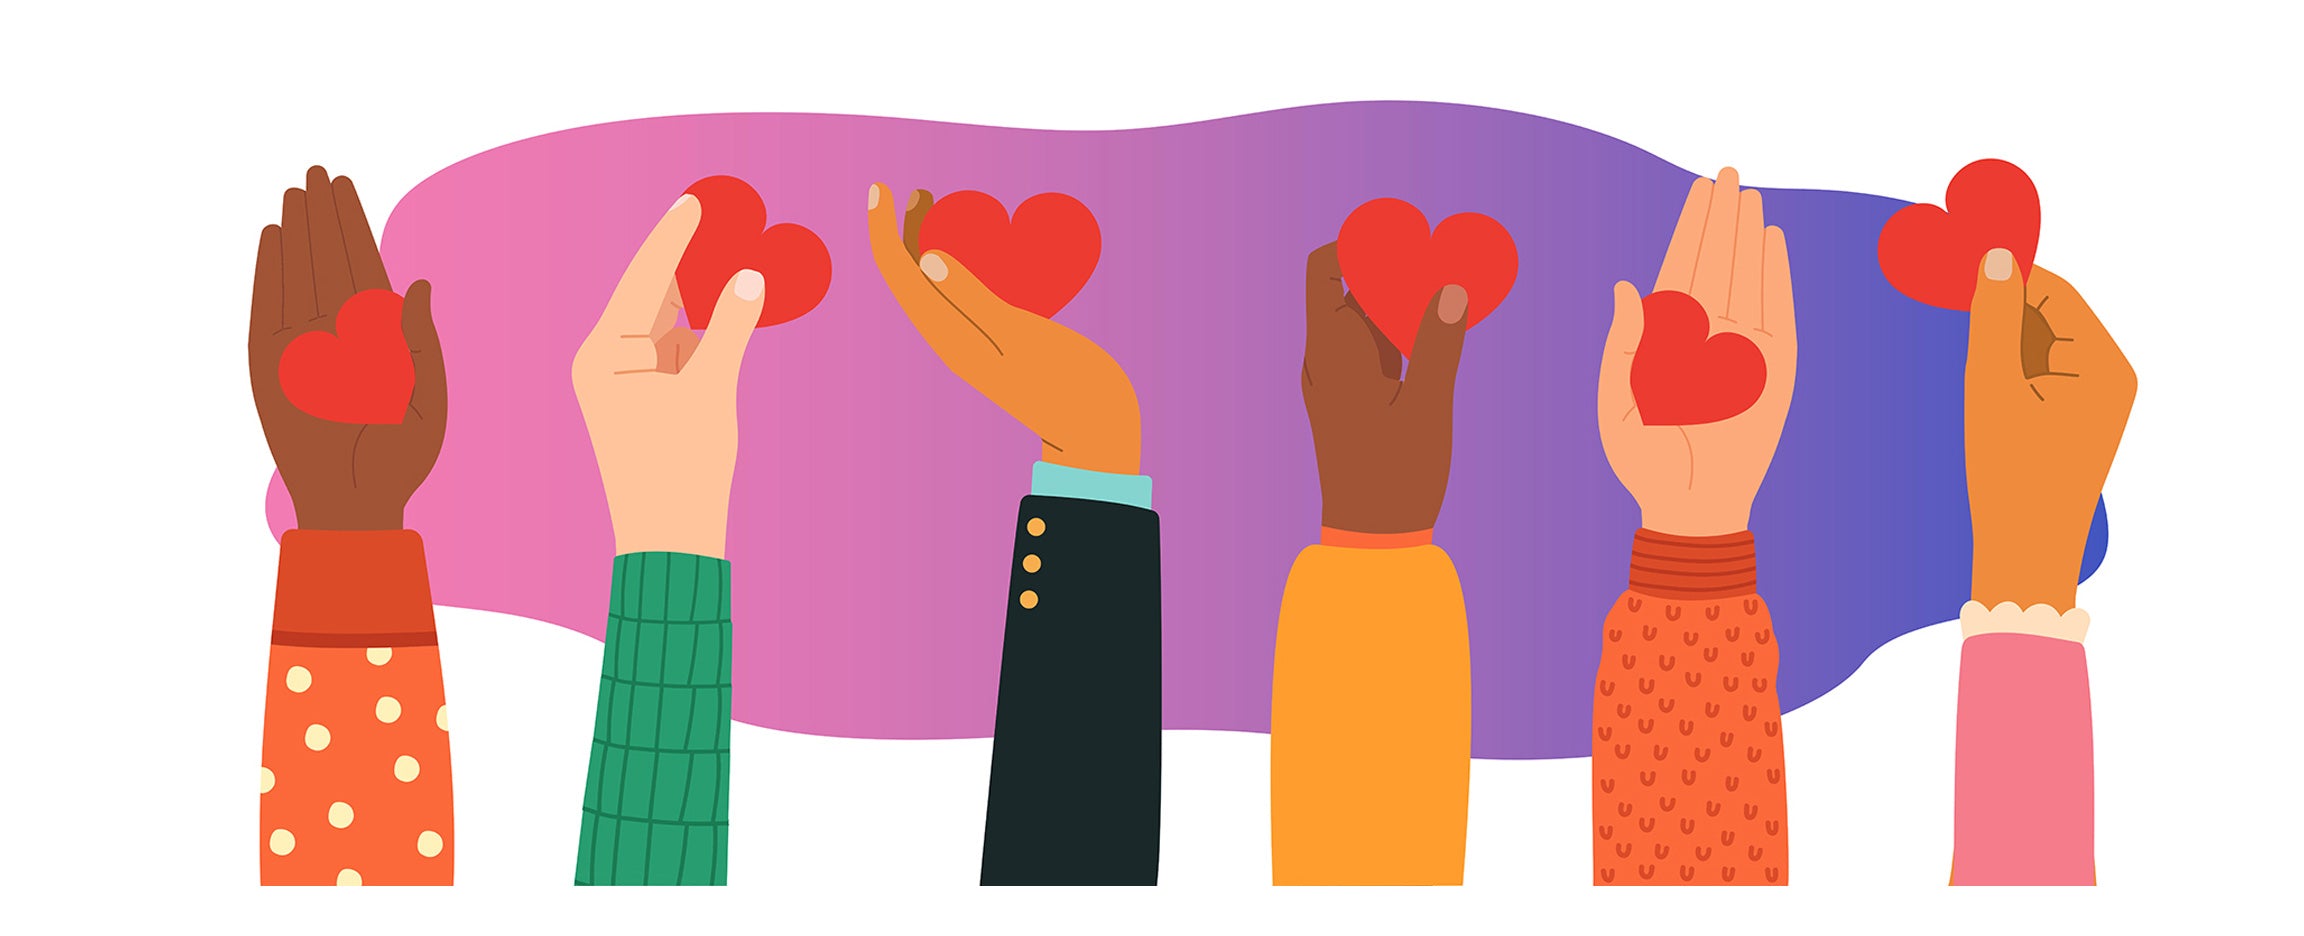 Illustration. In the foreground are a line of six arms outstretched up into the air. Each one is a different skin tone and each is holding a red heart in their hand. The image gives a sense of generosity and giving with a small but powerful gesture.